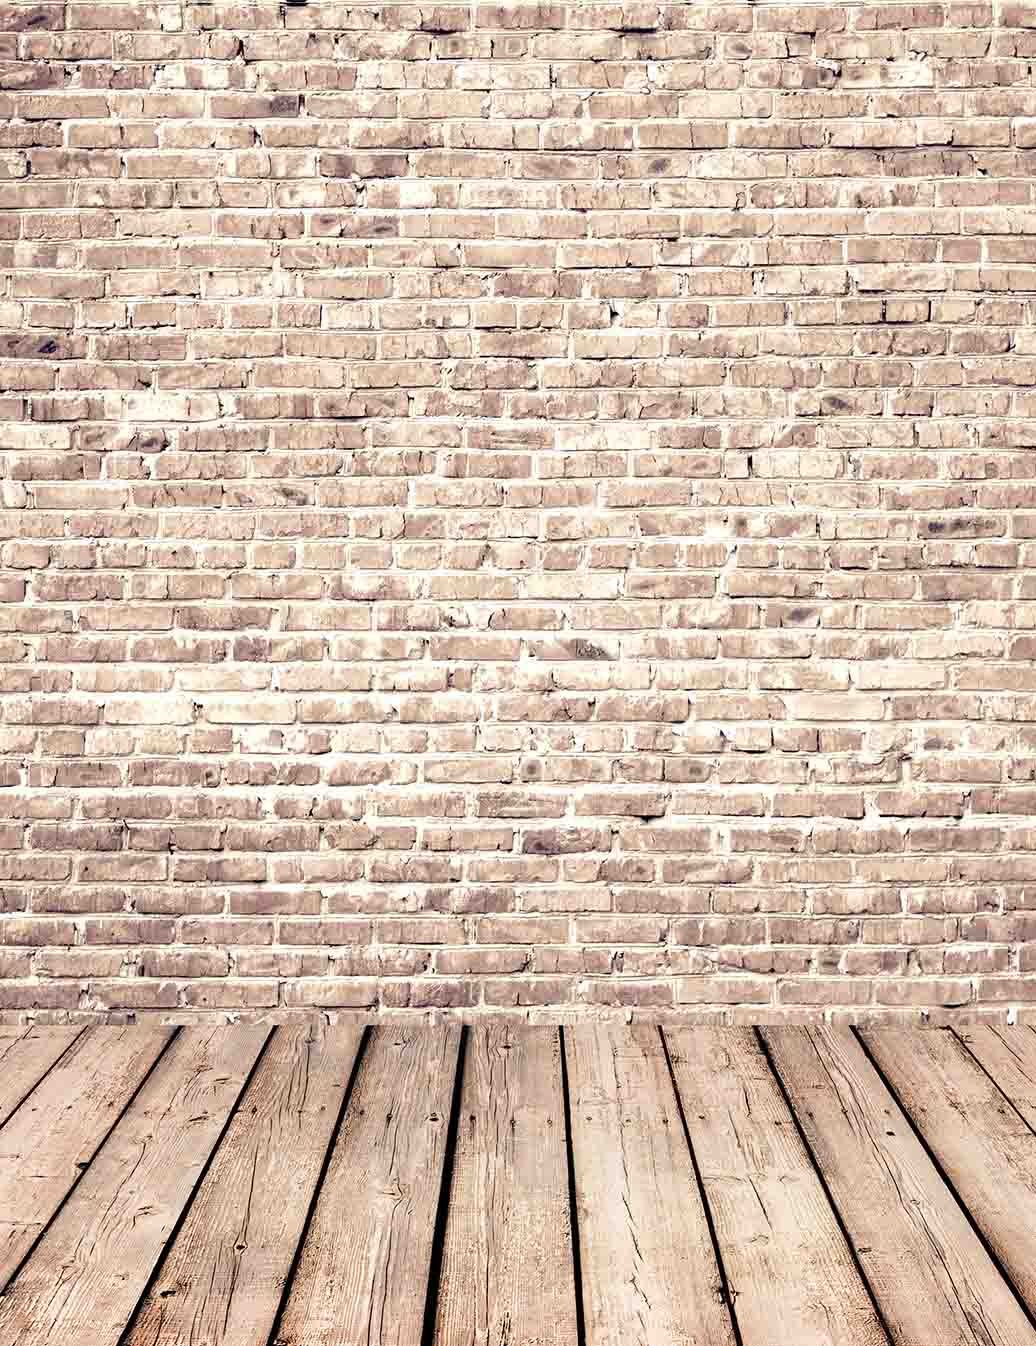 Senior Red Brick Wall Texture With Old Wood Floor Backdrop For Photography Shopbackdrop